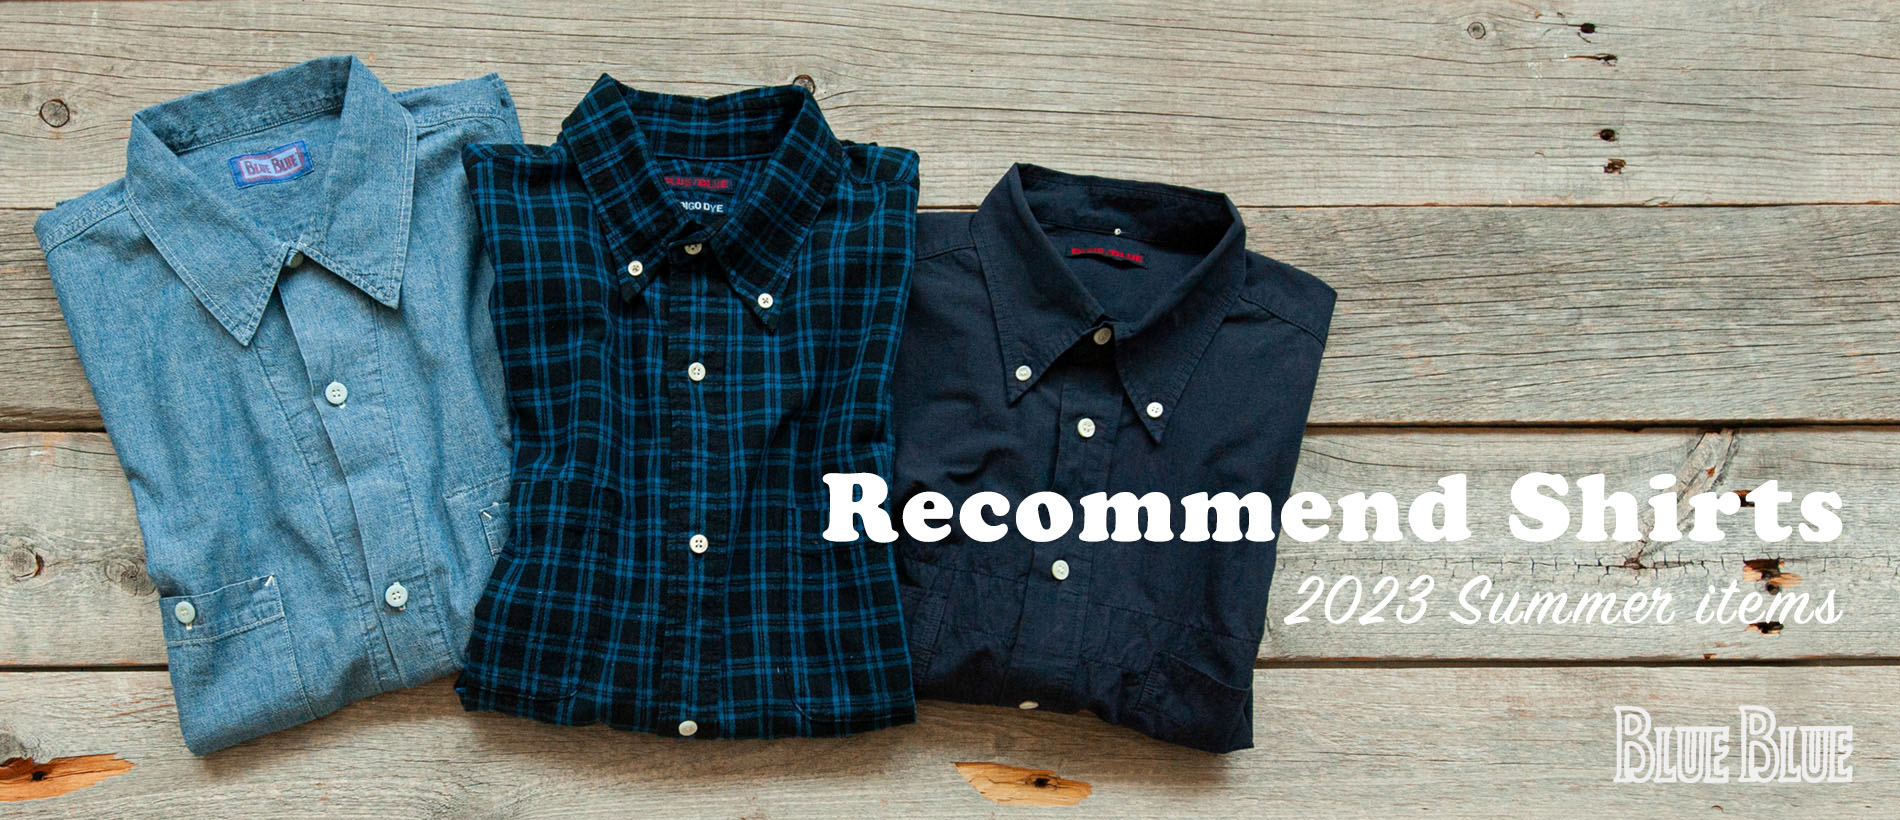 Recommend Shirts